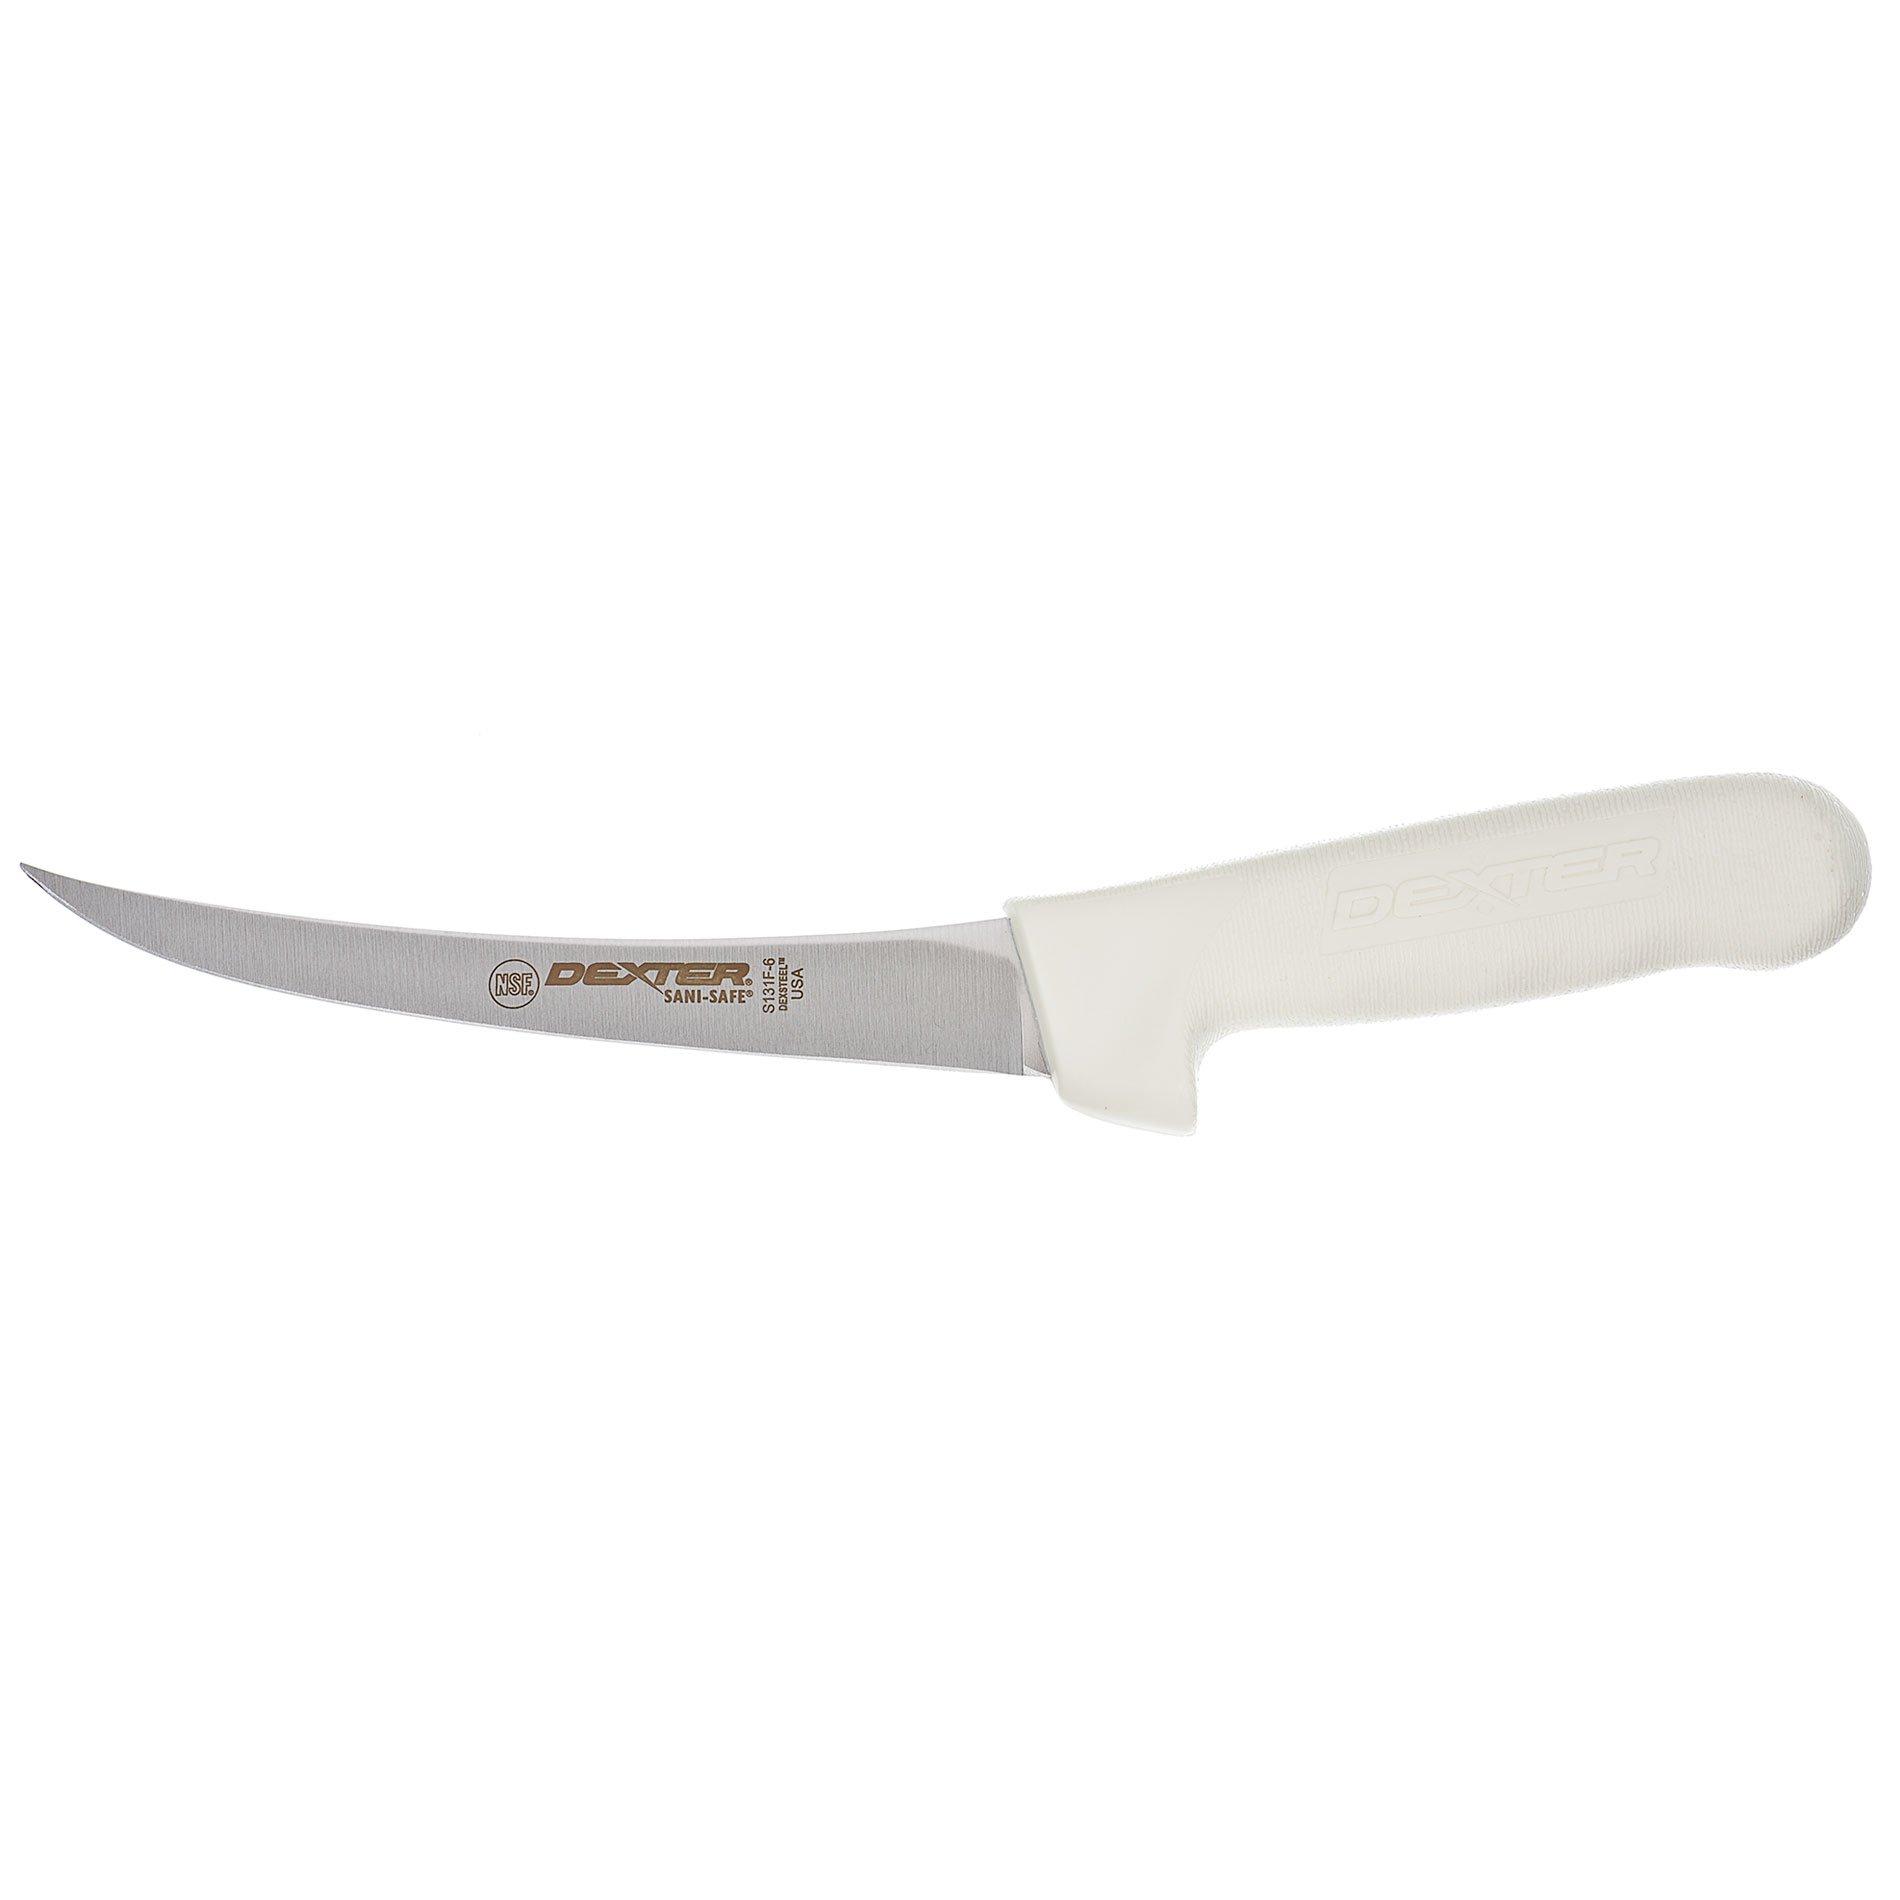 A six-inch boning knife with a flexible blade works well for all stages of butchering.